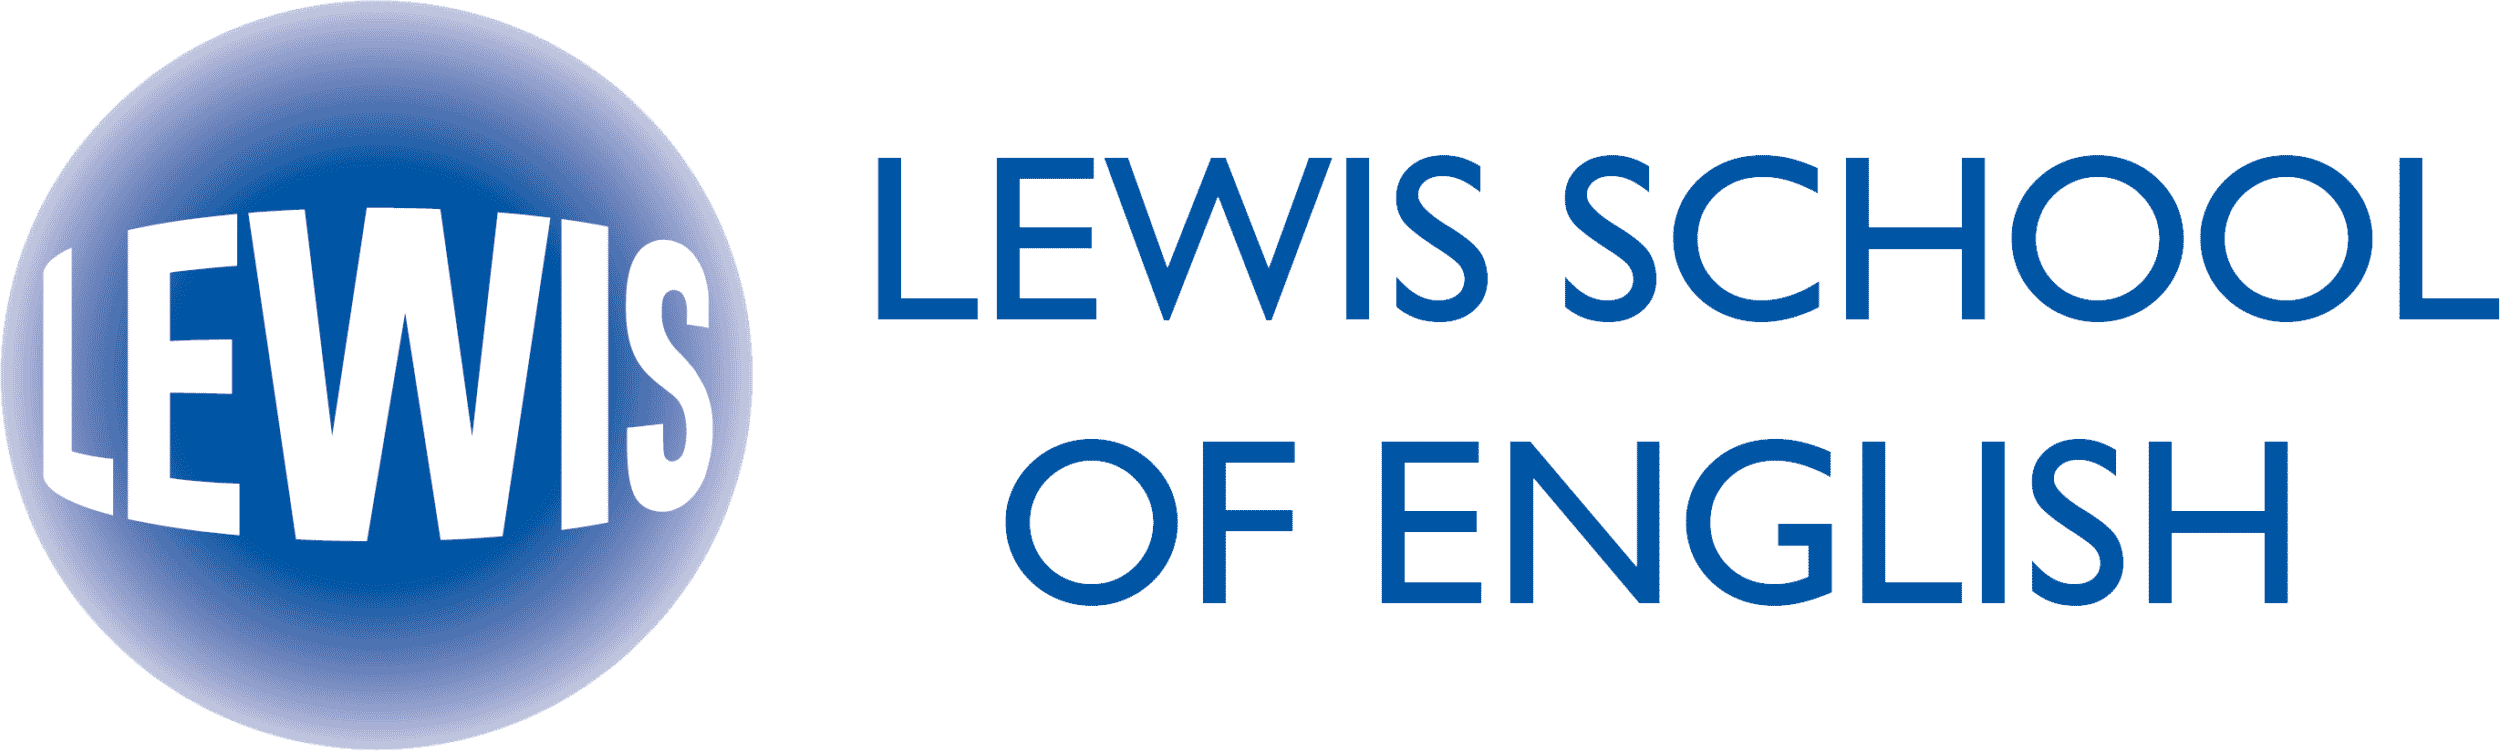 lewis school logo and name only - middle - trans